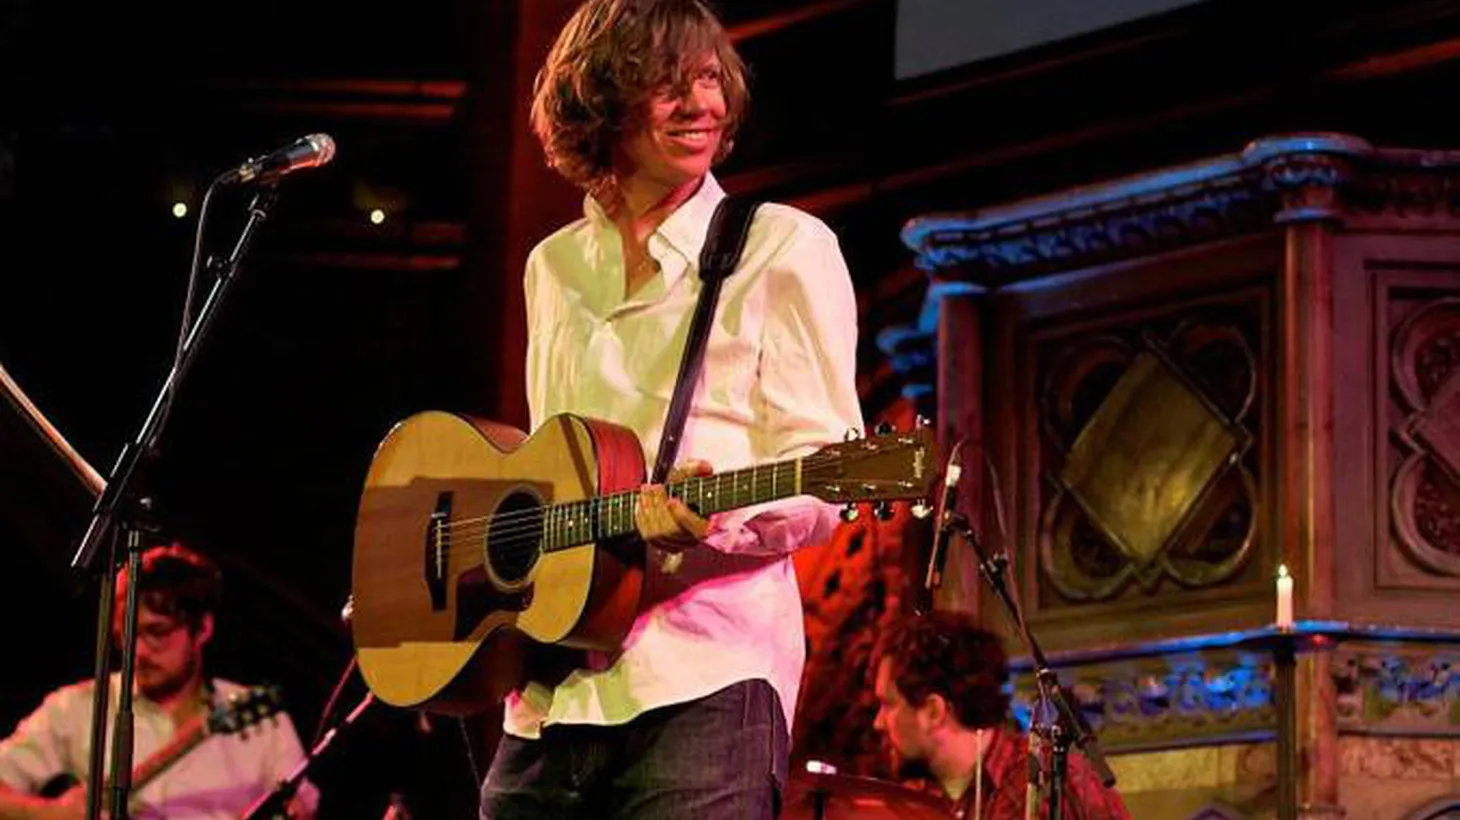 Sonic Youth front-man Thurston Moore released a surprising solo record earlier this year that showed his softer side, with more acoustic arrangements and introspective lyrics....